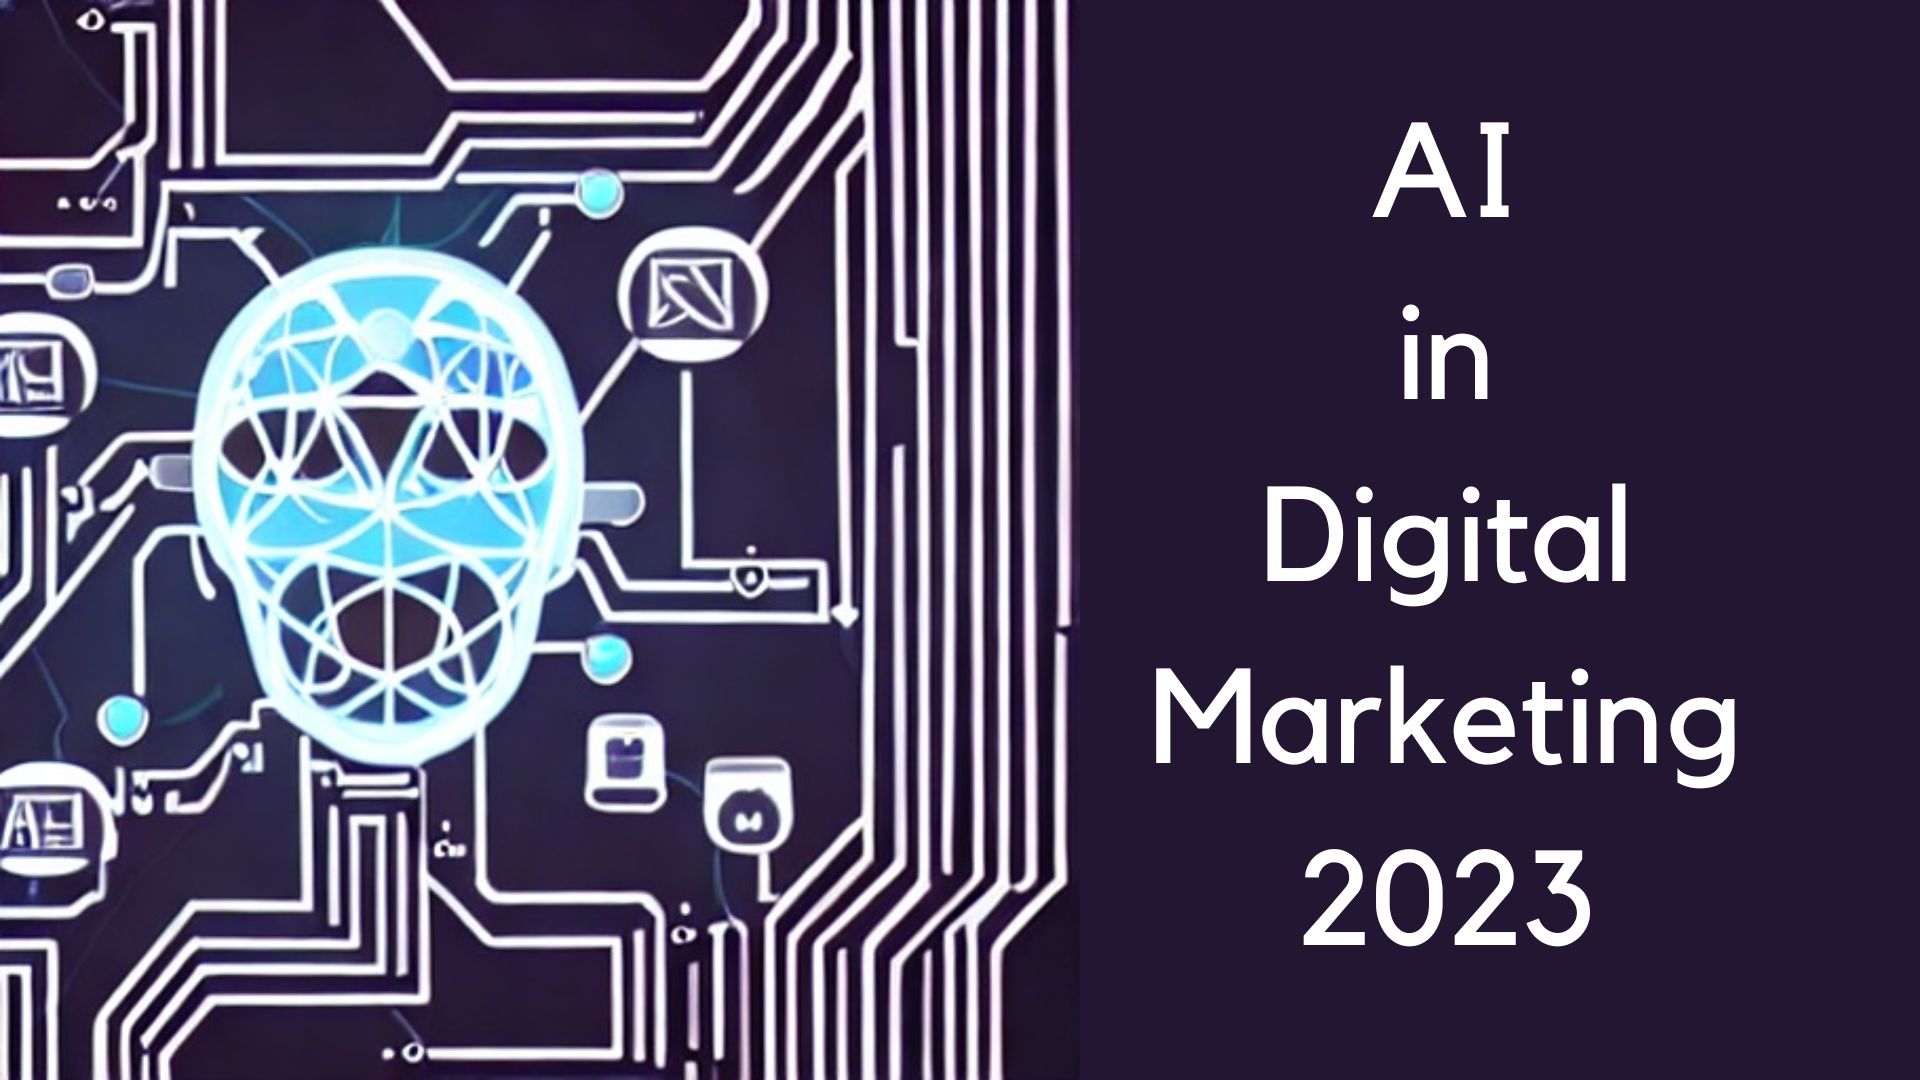 You are currently viewing AI in Digital Marketing 2023